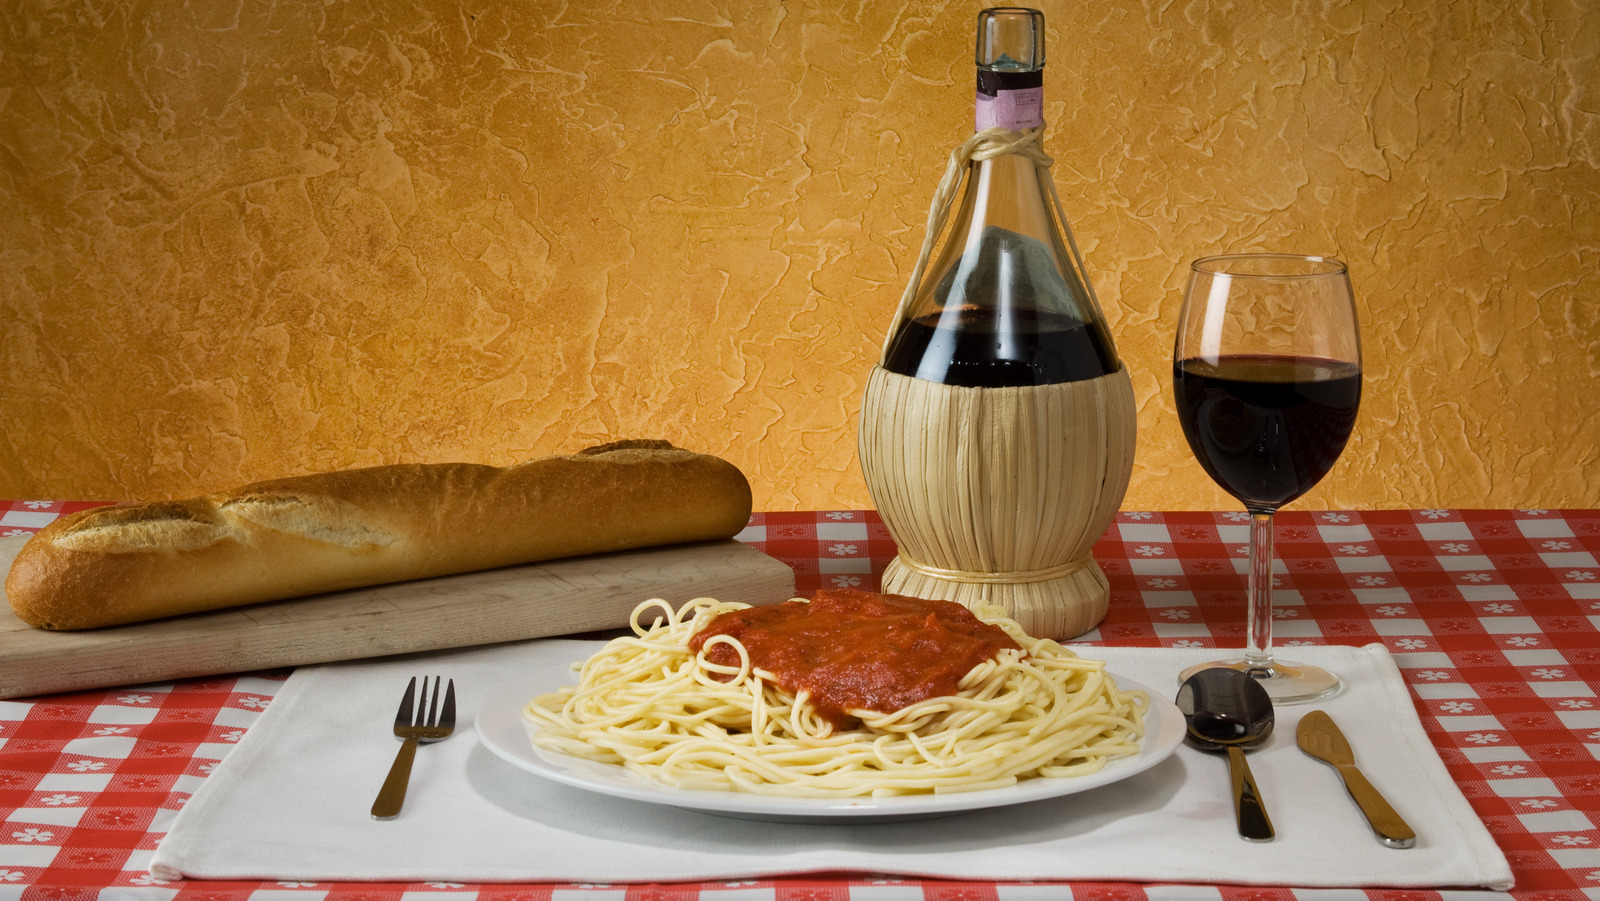 Worlds Collide When You Pair Cal-Ital Wines With Spaghetti And Red Sauce – Mashed